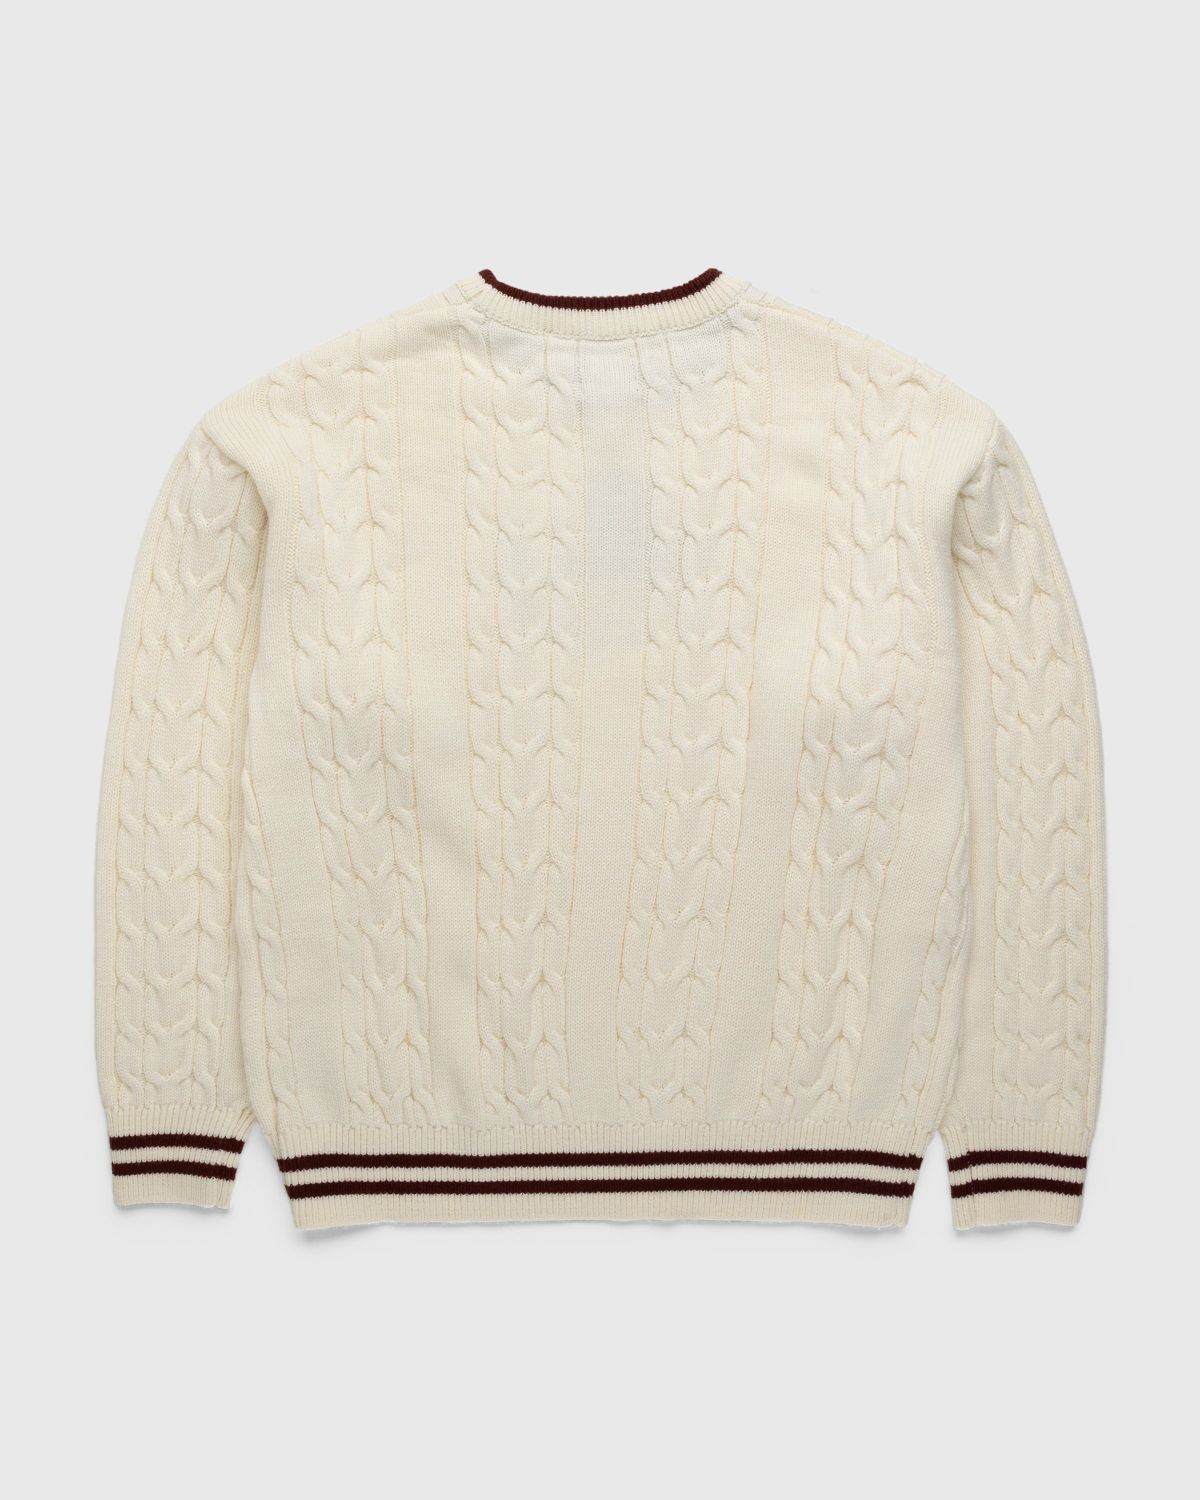 Patta – Premium Cable Knitted Sweater Vanilla Ice - Knitwear - White - Image 2